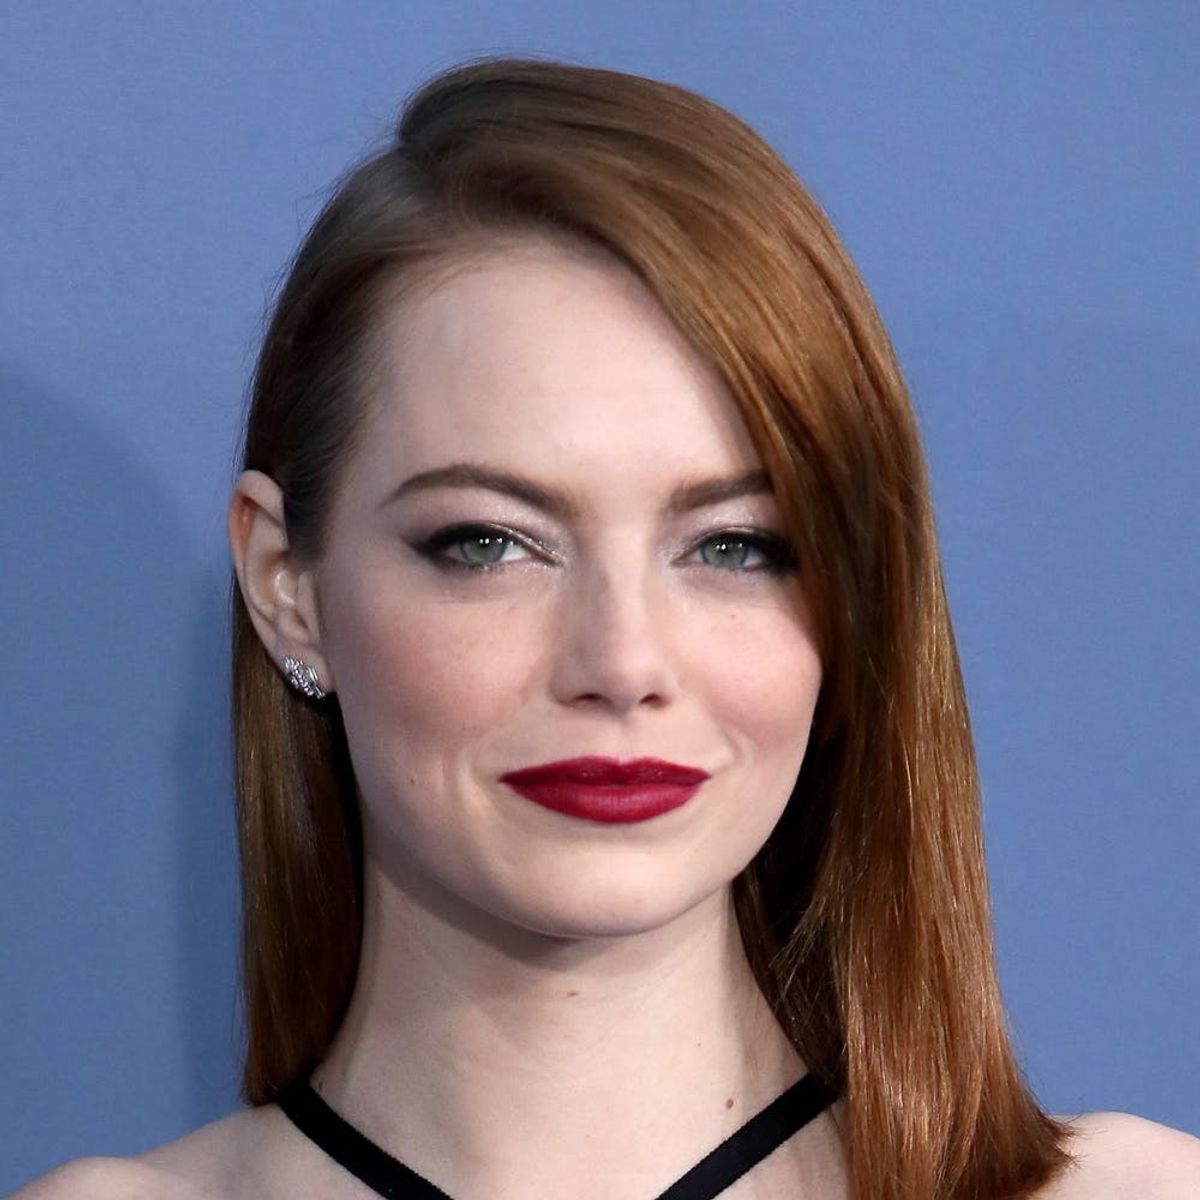 The Last 24 Hours Have Proven Emma Stone Is a Top Oscar Contender